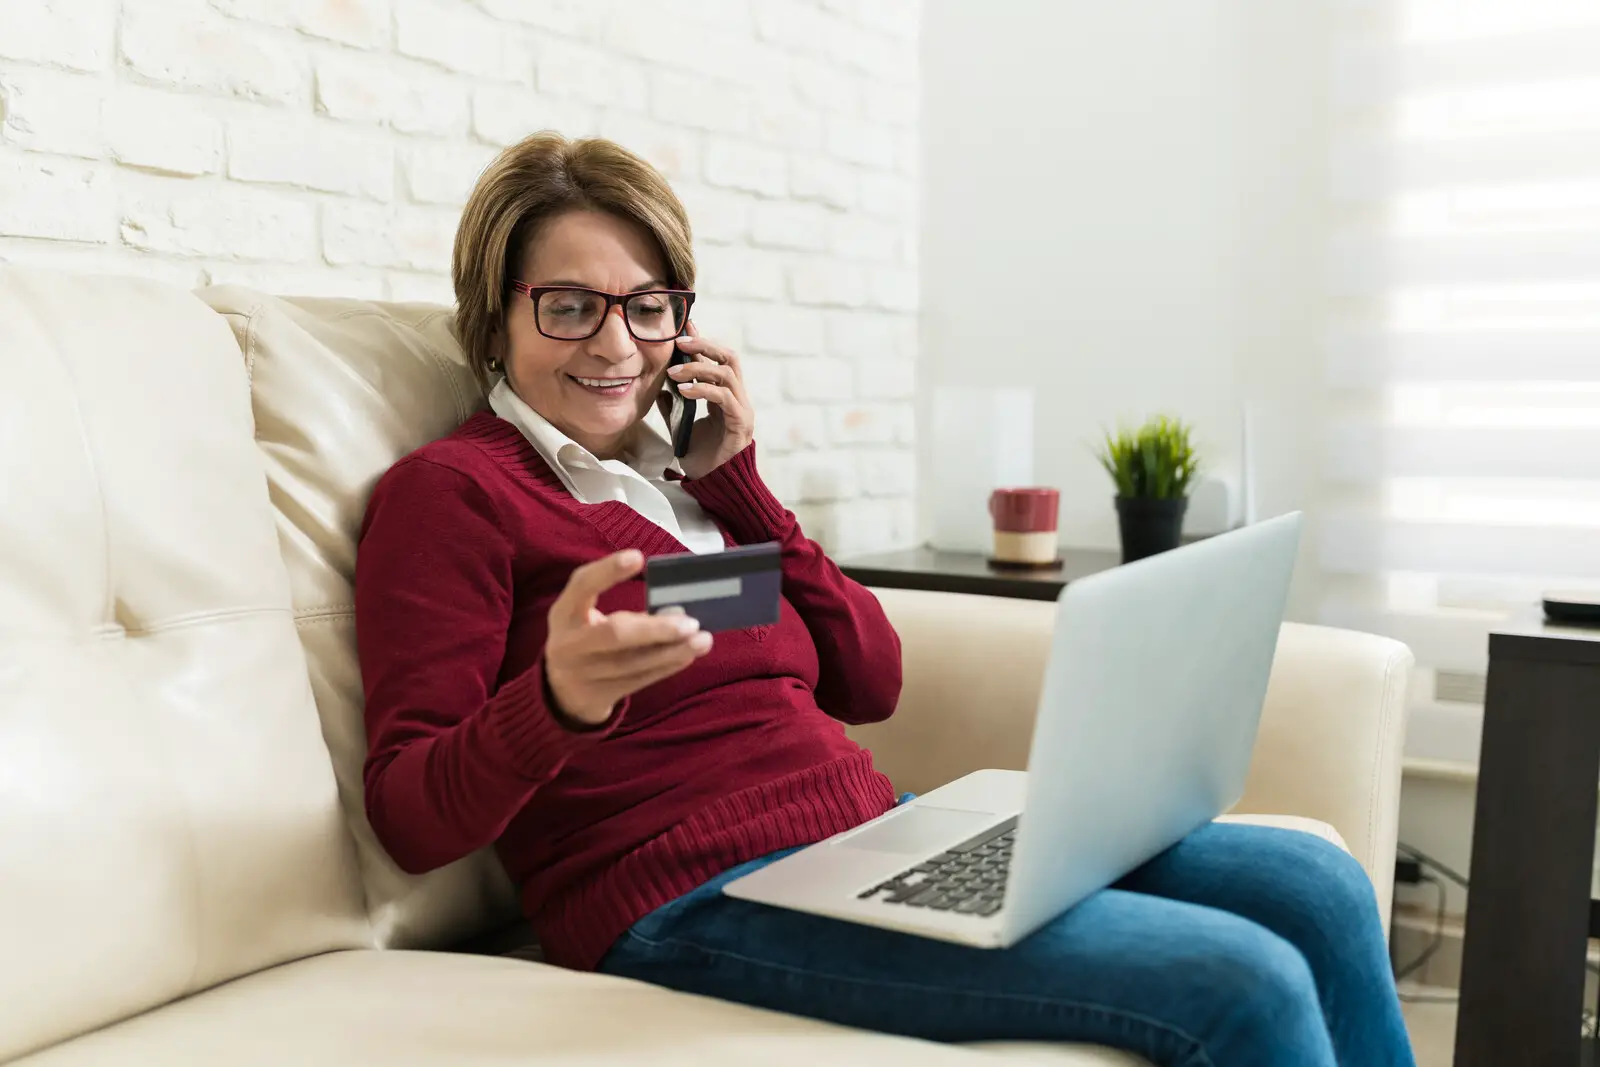 Mature woman smiling sitting on the couch giving her credit card number over the phone